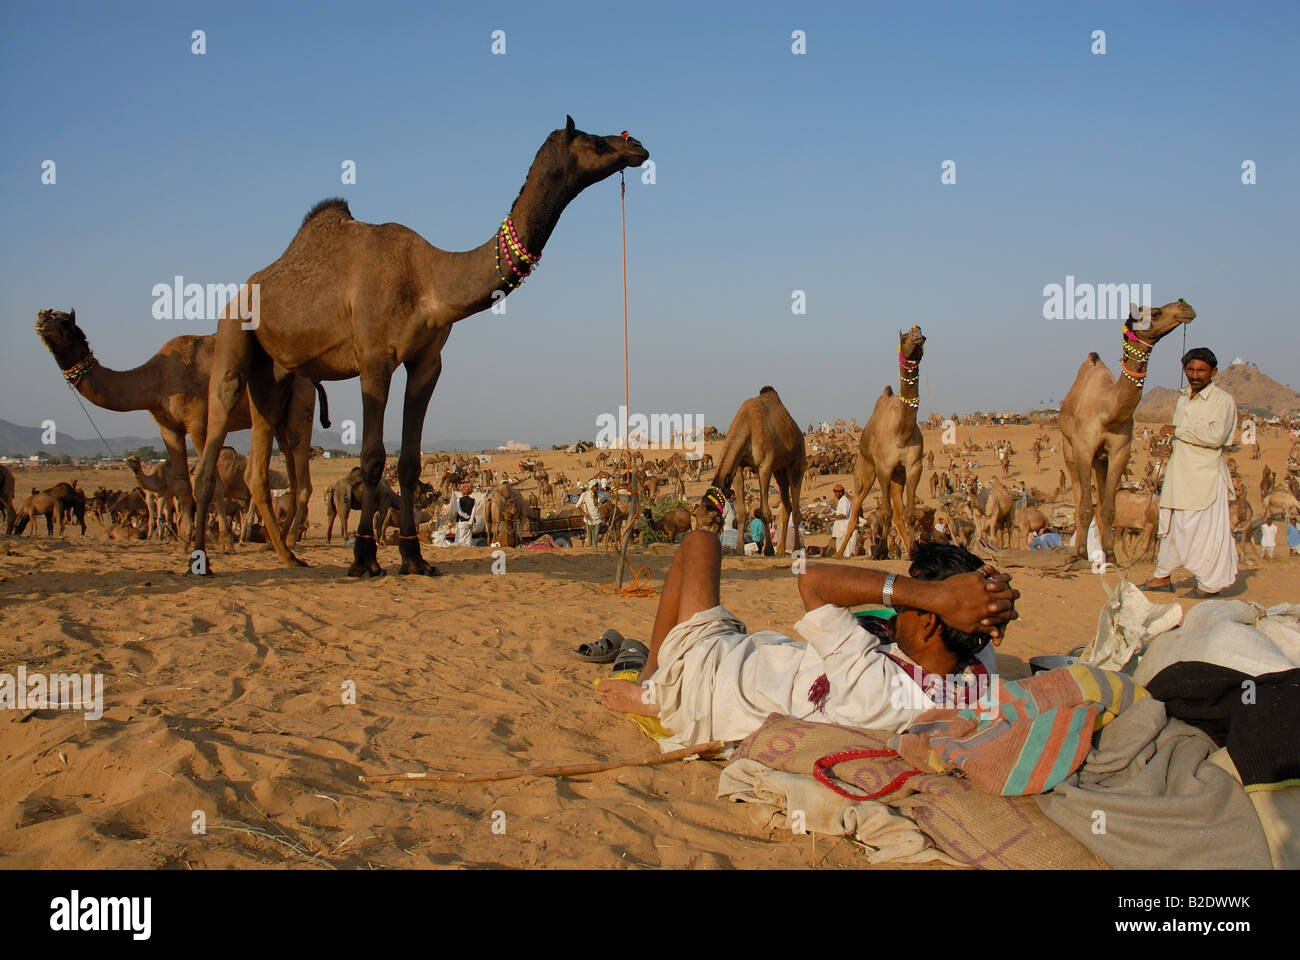 A camel trader relaxing after a day’s work at the camel fair grounds at Pushkar, Rajasthan. India. Stock Photo